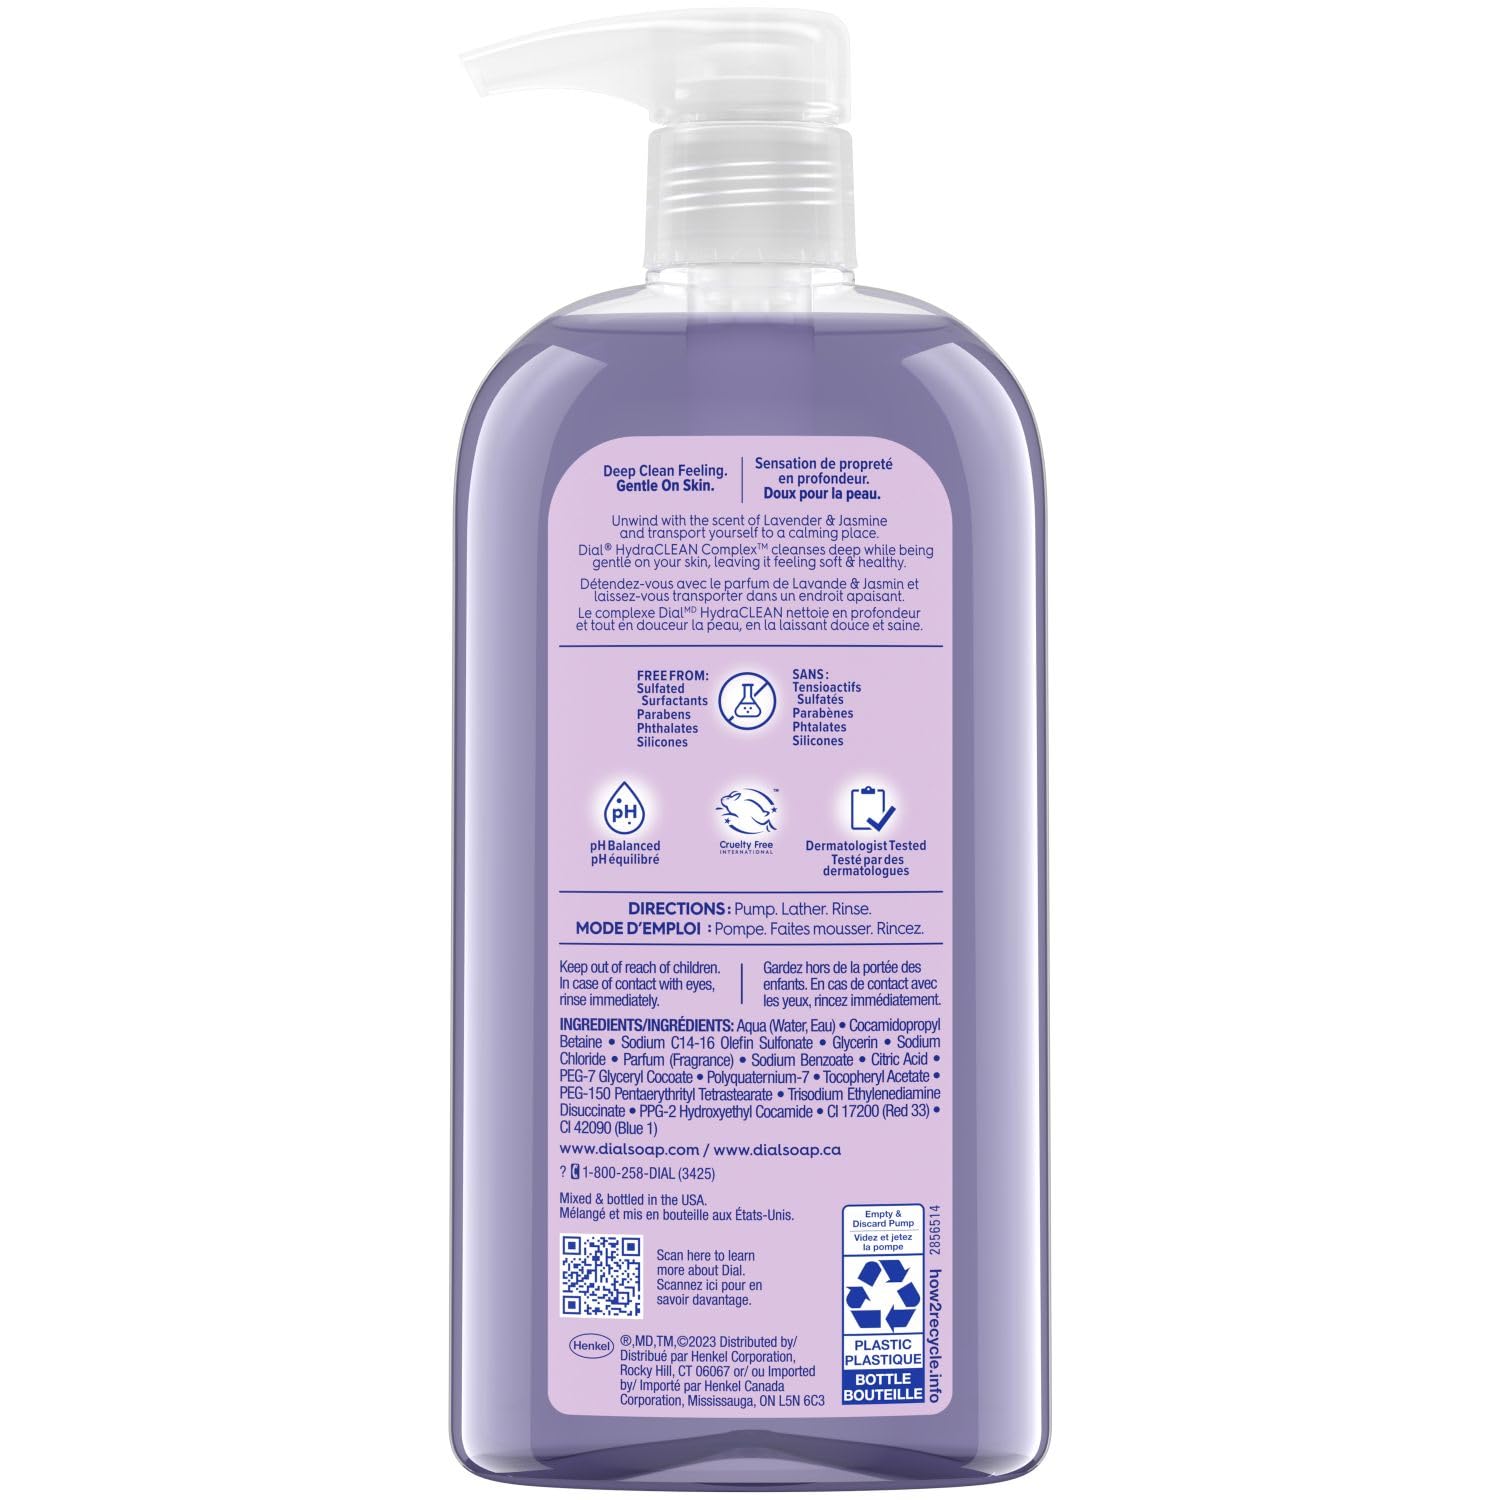 Dial Body Wash, Calm & Soothe Lavender & Jasmine Scent, 23 Fl Oz, Pack Of 3